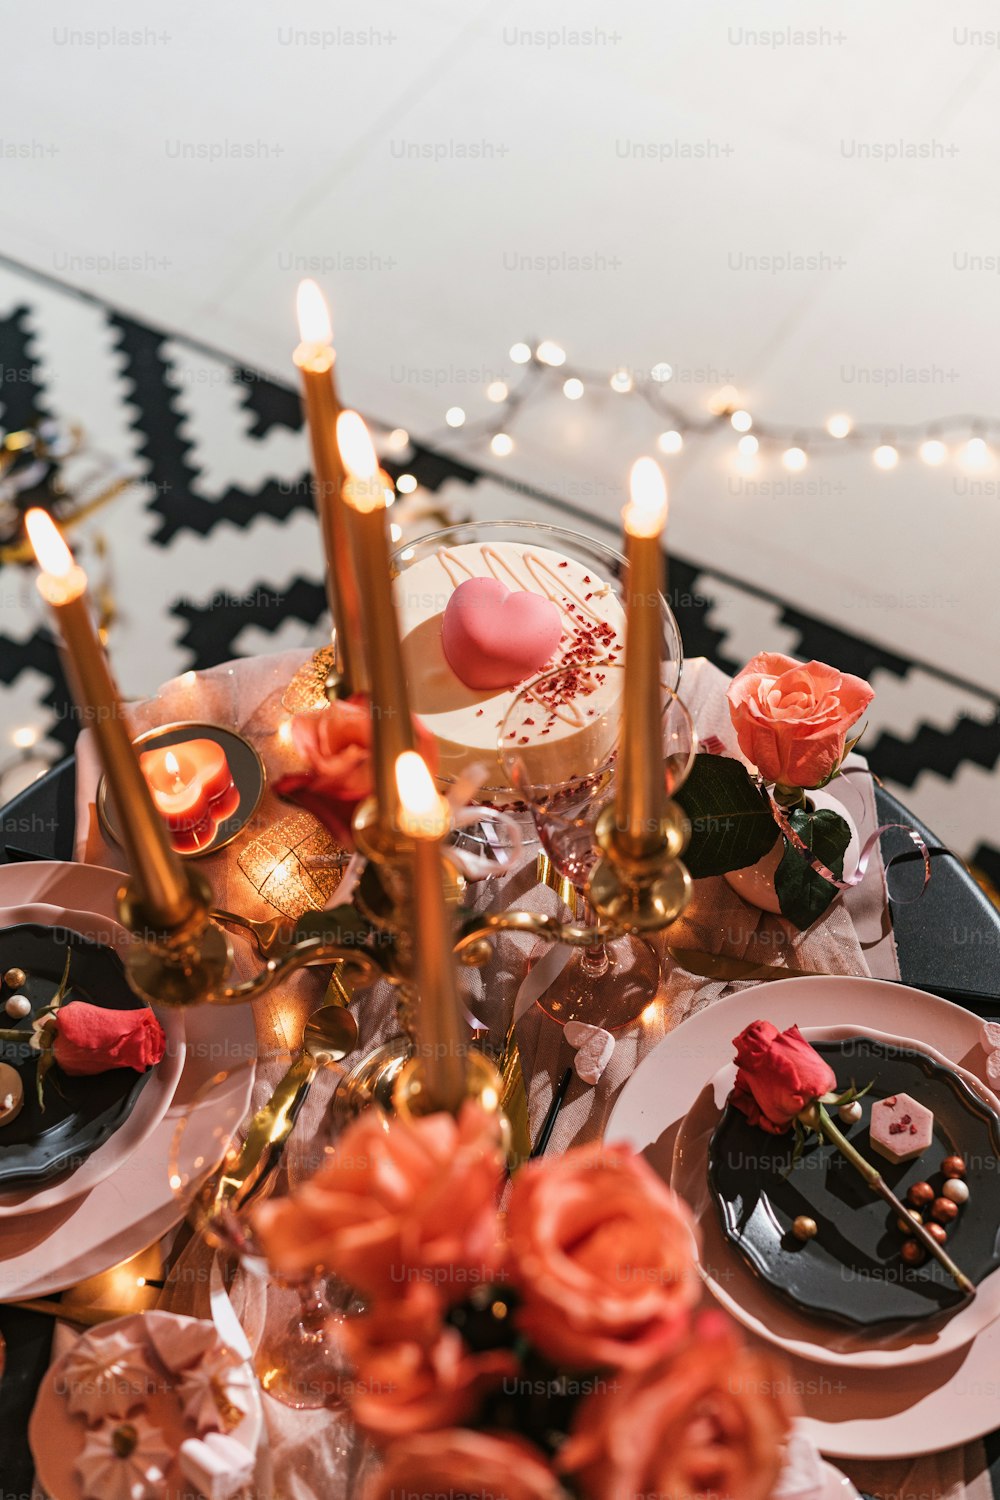 a table is set with a cake and candles